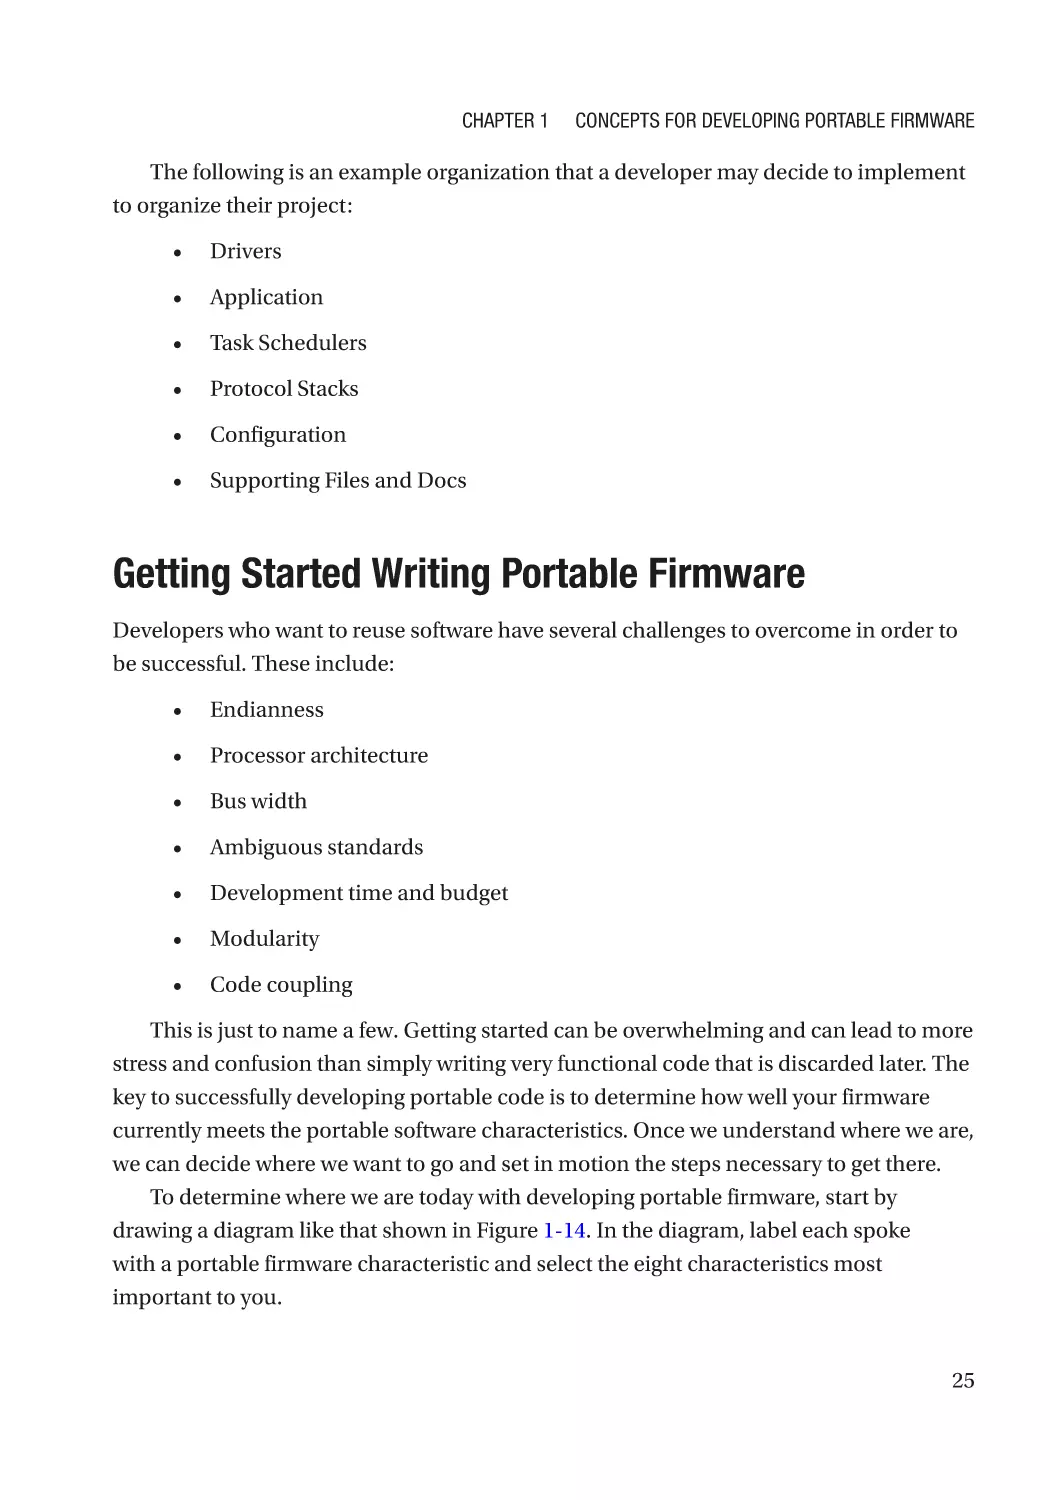 Getting Started Writing Portable Firmware